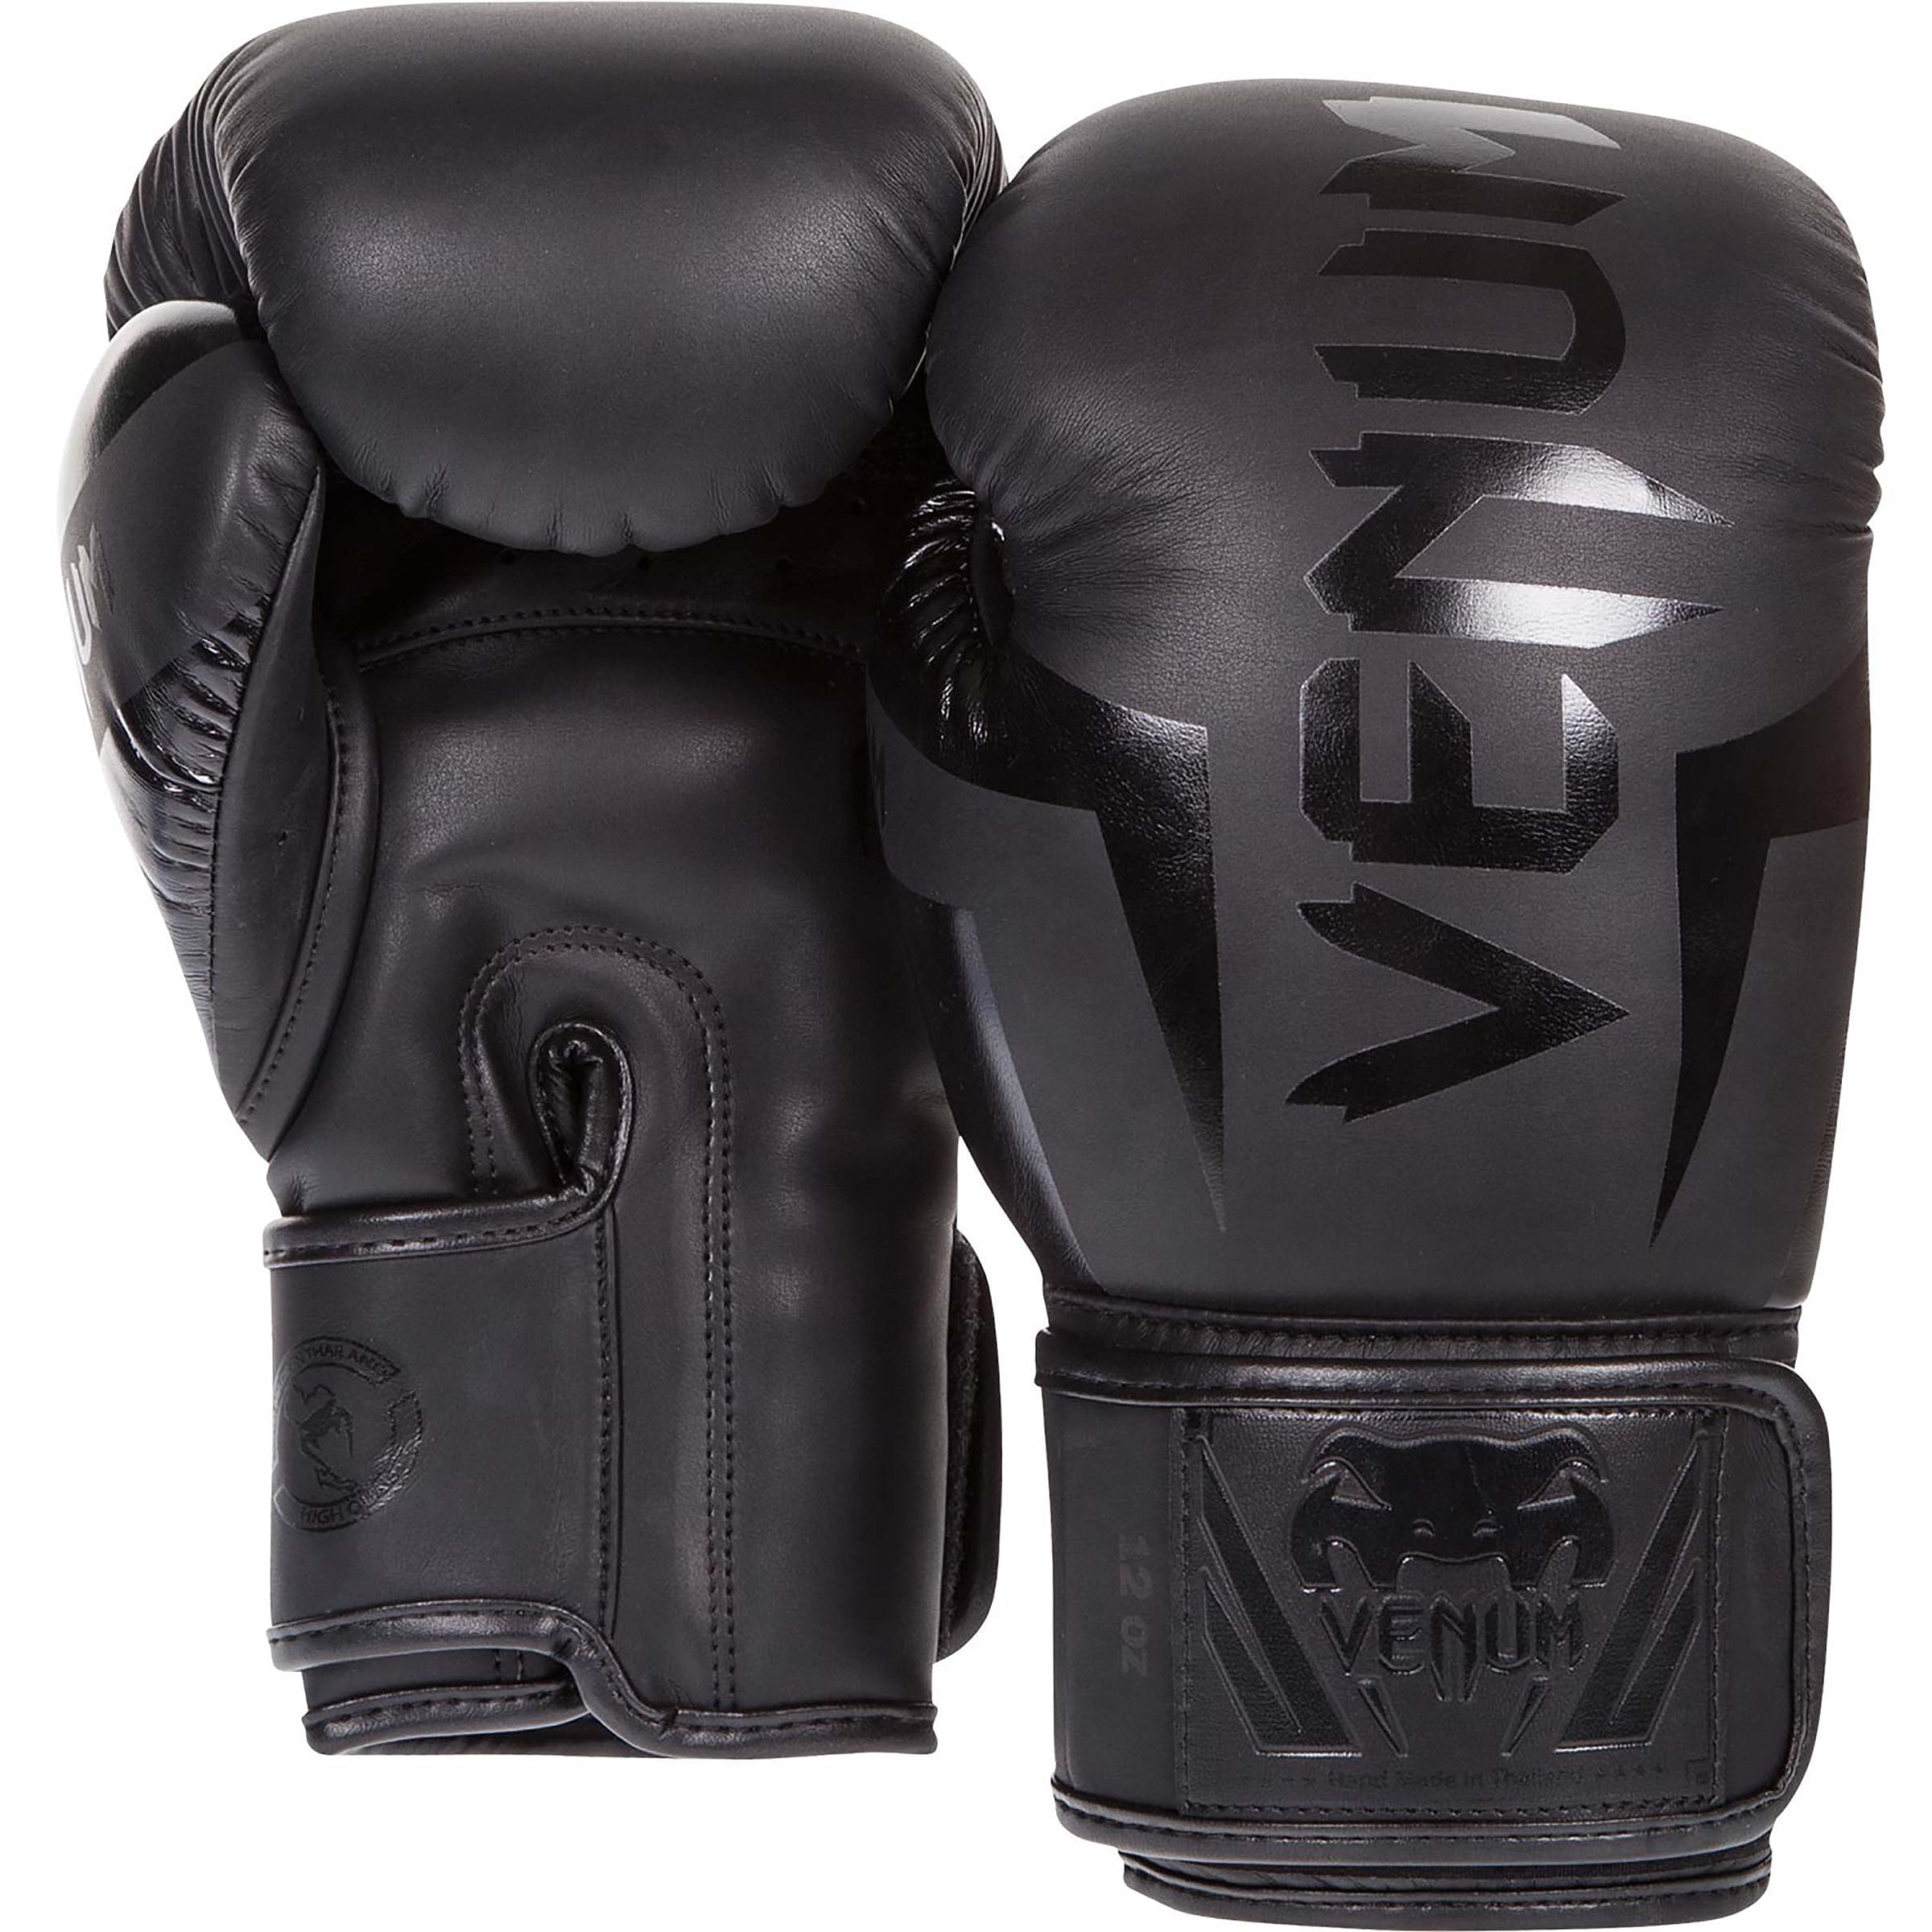 12oz Gloves Black/White Max Strength Focus Pads and Boxing Gloves Set